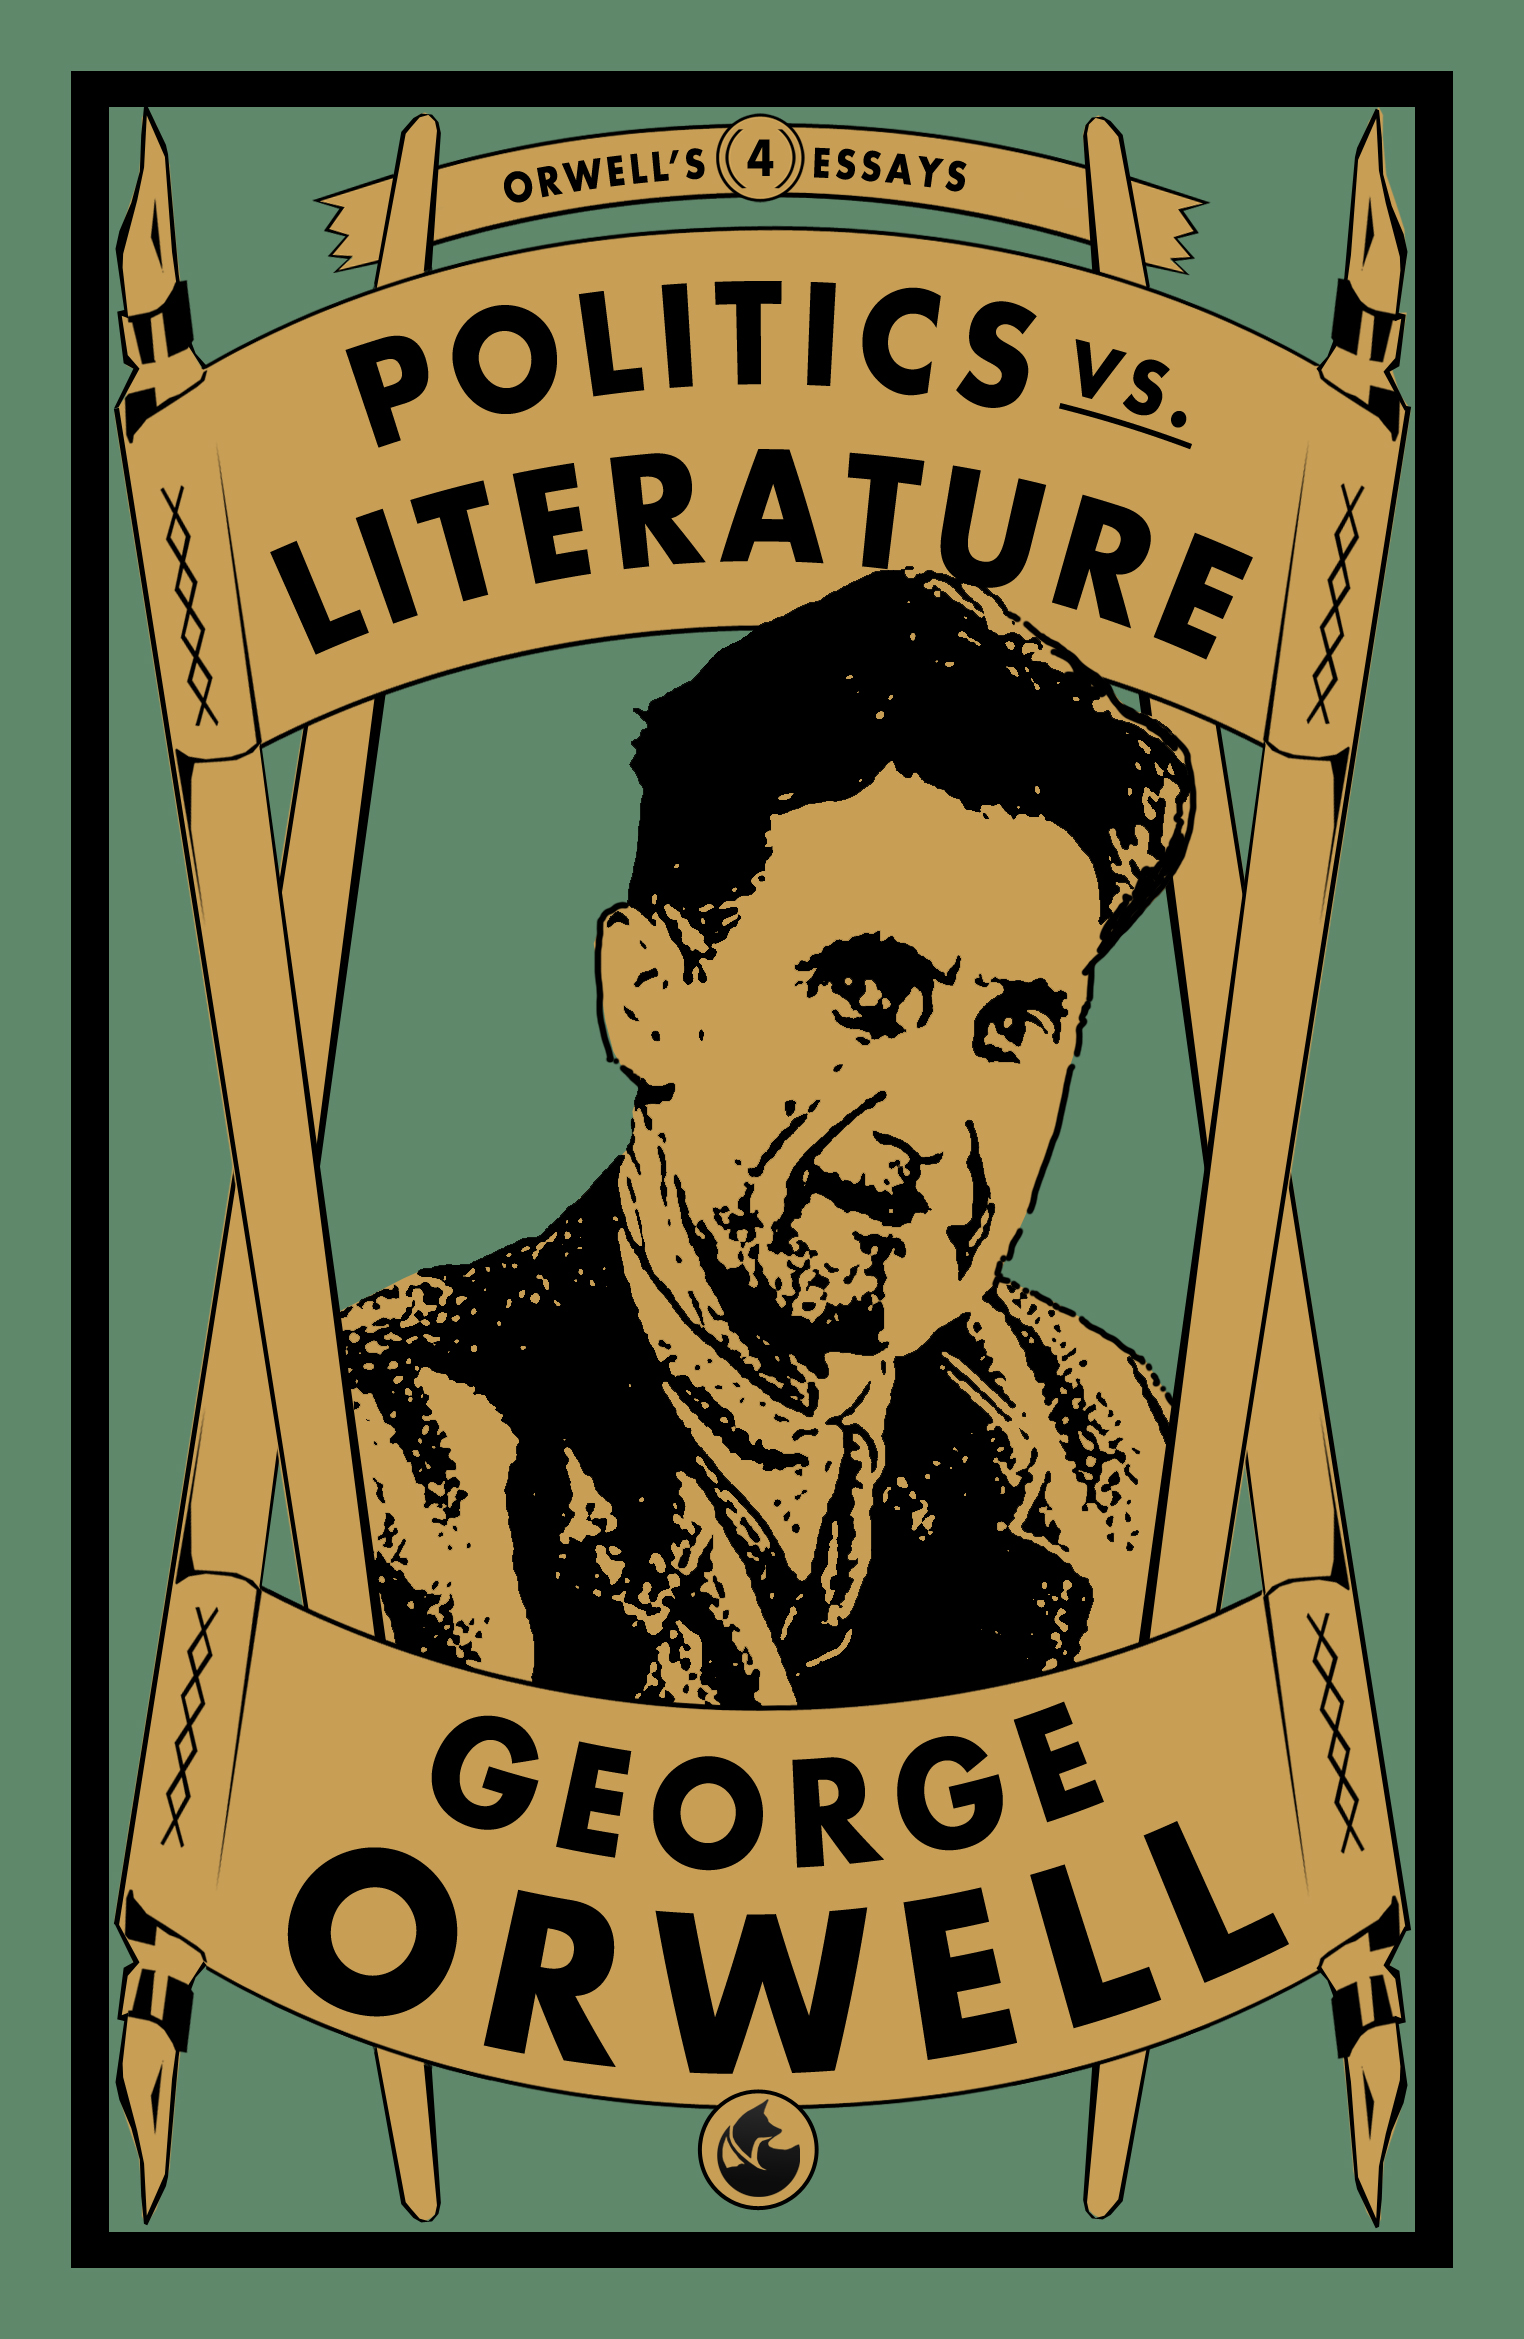 Books v. Cigarettes by George Orwell